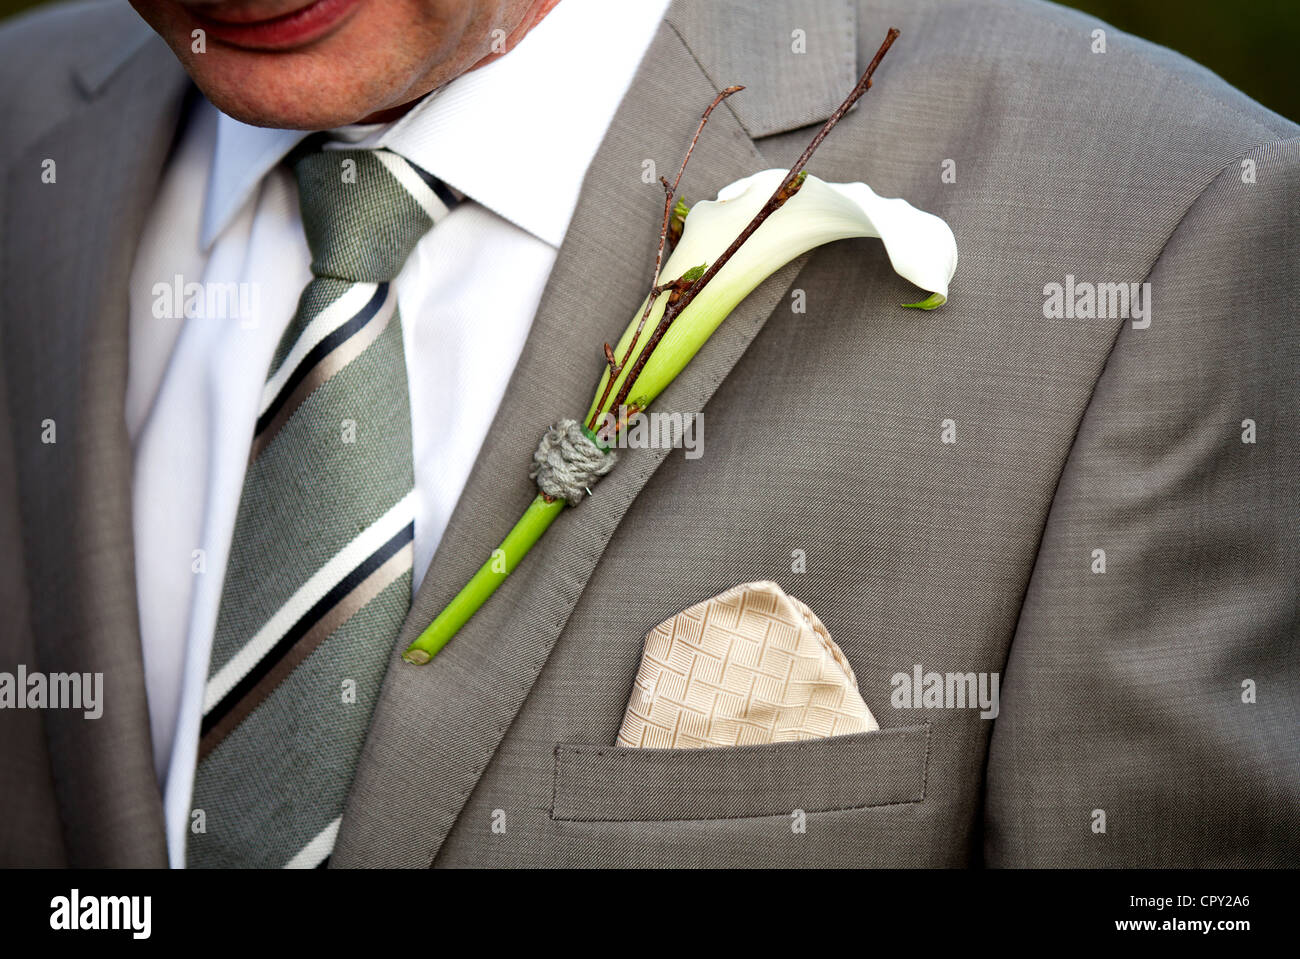 A Lily, Lilium, flower worn by a Groom at a wedding on the lapal of a smart suit. A boutonniere Stock Photo